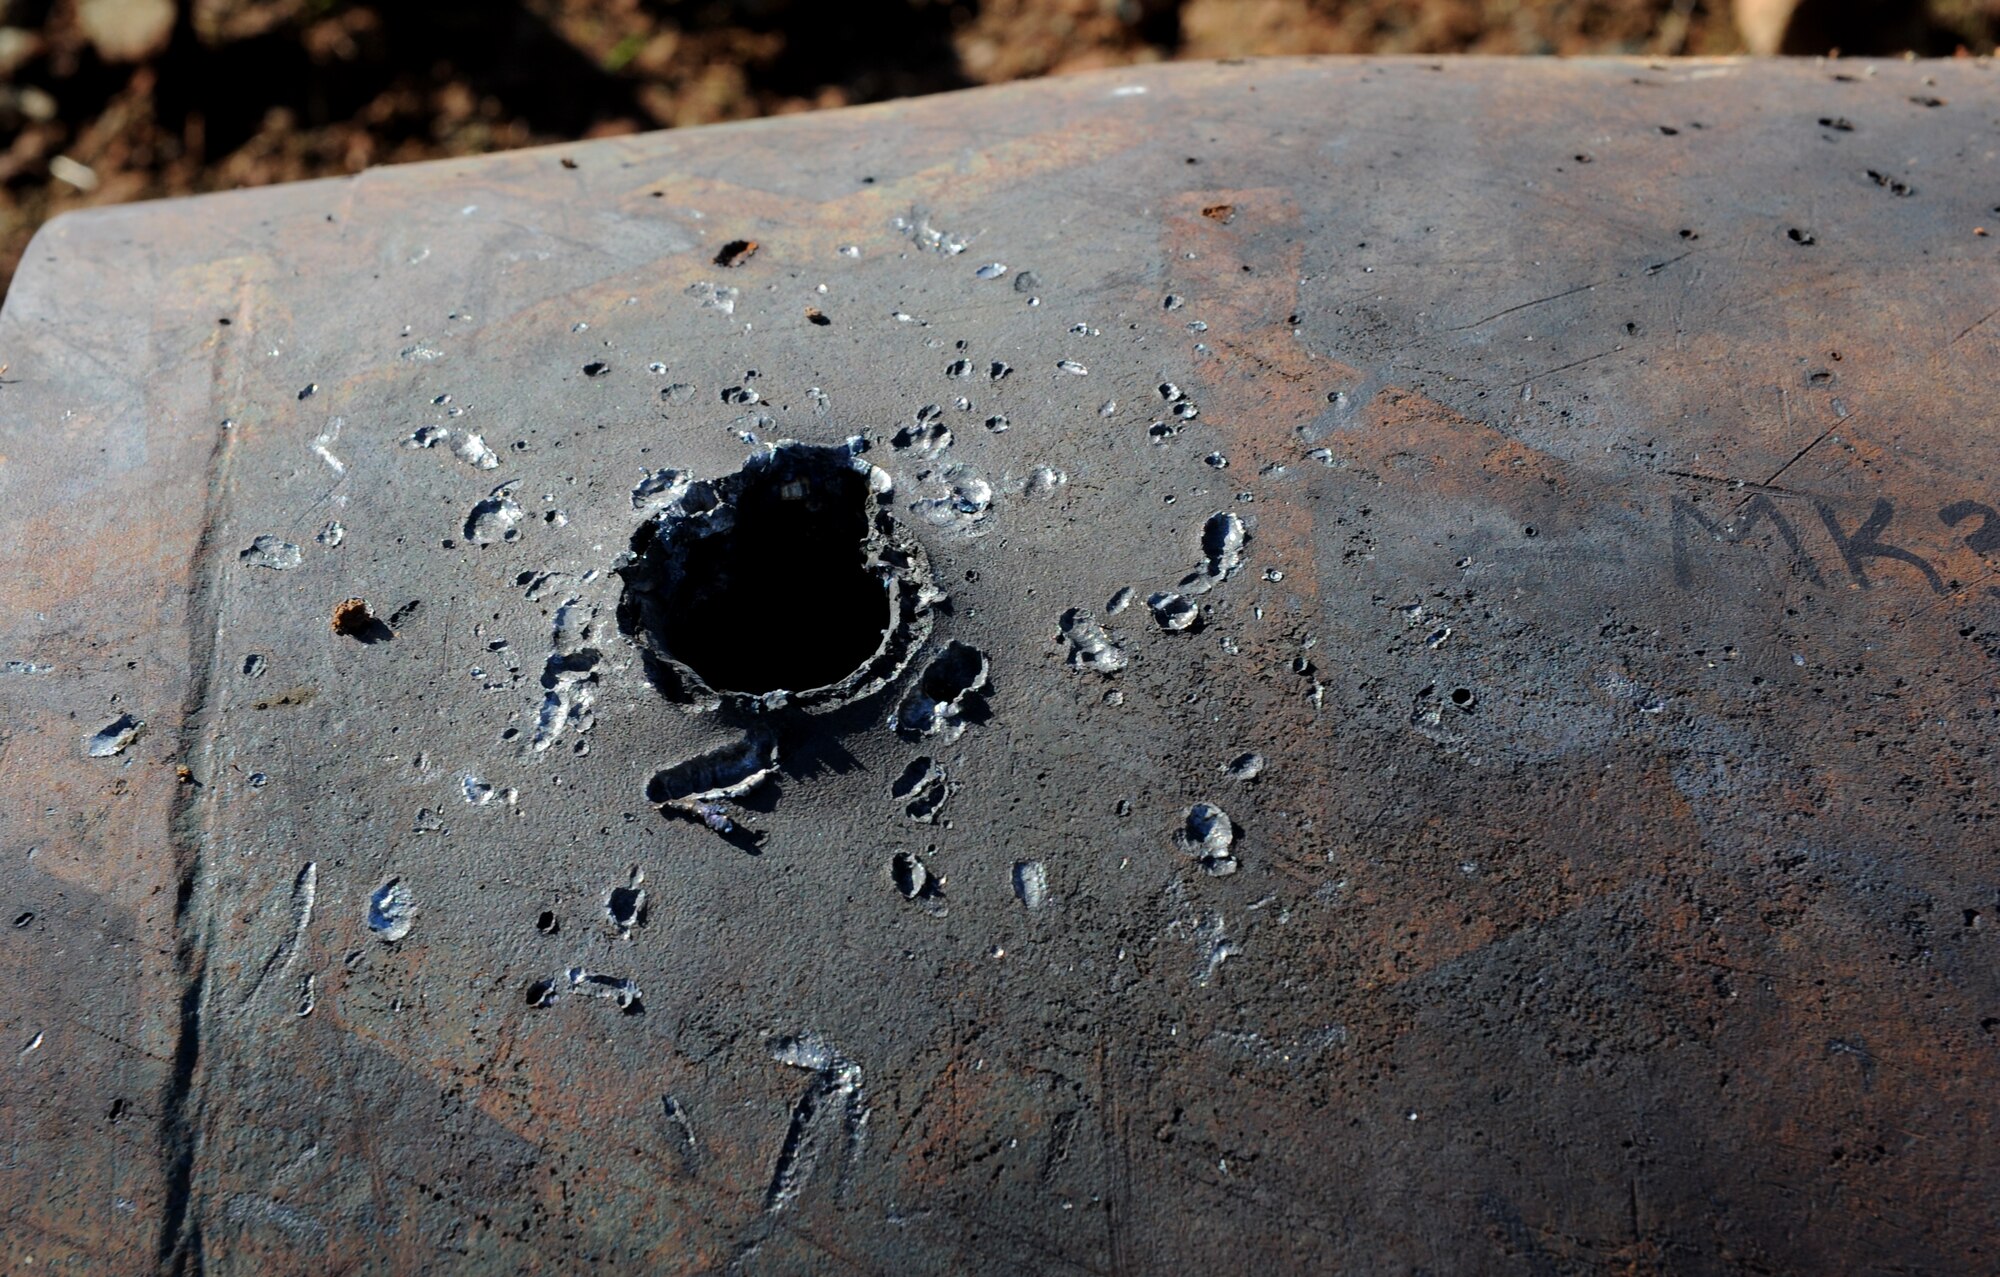 Inert ordnance is damaged by a shaped charge at the explosive ordinance disposal range on Beale Air Force Base, Calif., Dec. 19, 2012. EOD Airmen often train with different explosives to see the blasting effects. (U.S. Air Force photo by Staff Sgt. Robert M. Trujillo/Released)